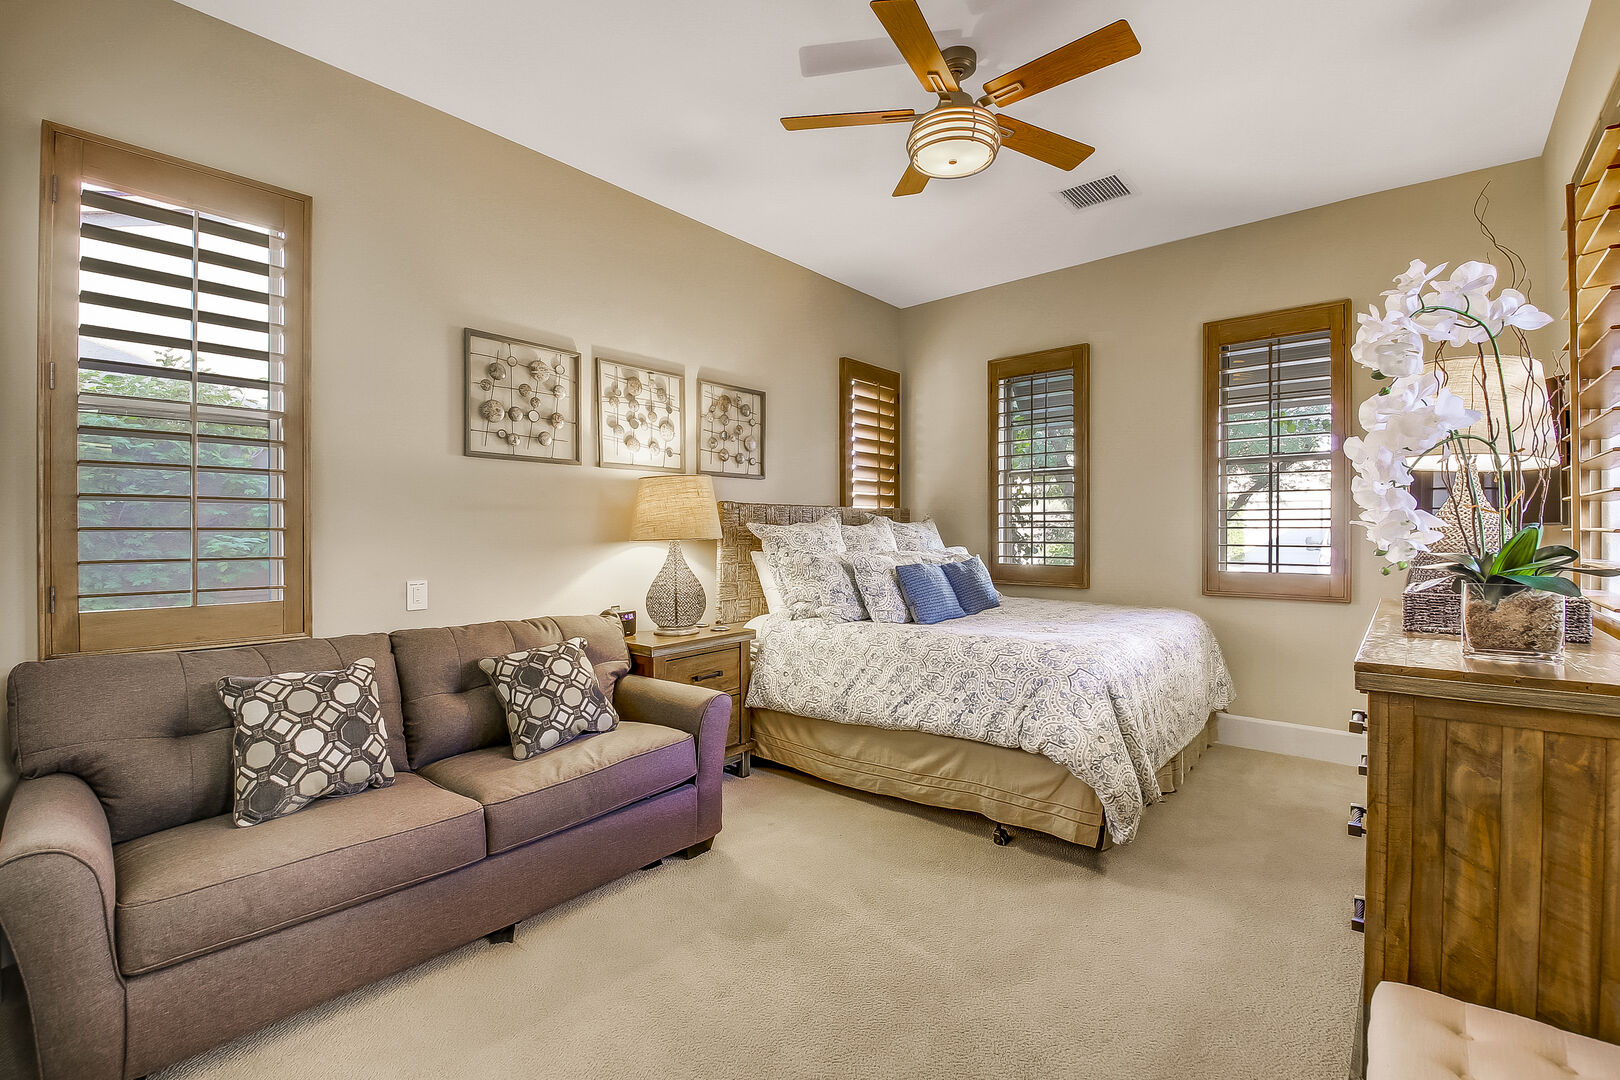 Suite 3 is next to the entrance doors and features a King-sized Bed, a Full-sized Sofa Sleeper, a 44-inch Samsung 4K Smart television, a remote-controlled ceiling fan, and a reach-in closet.